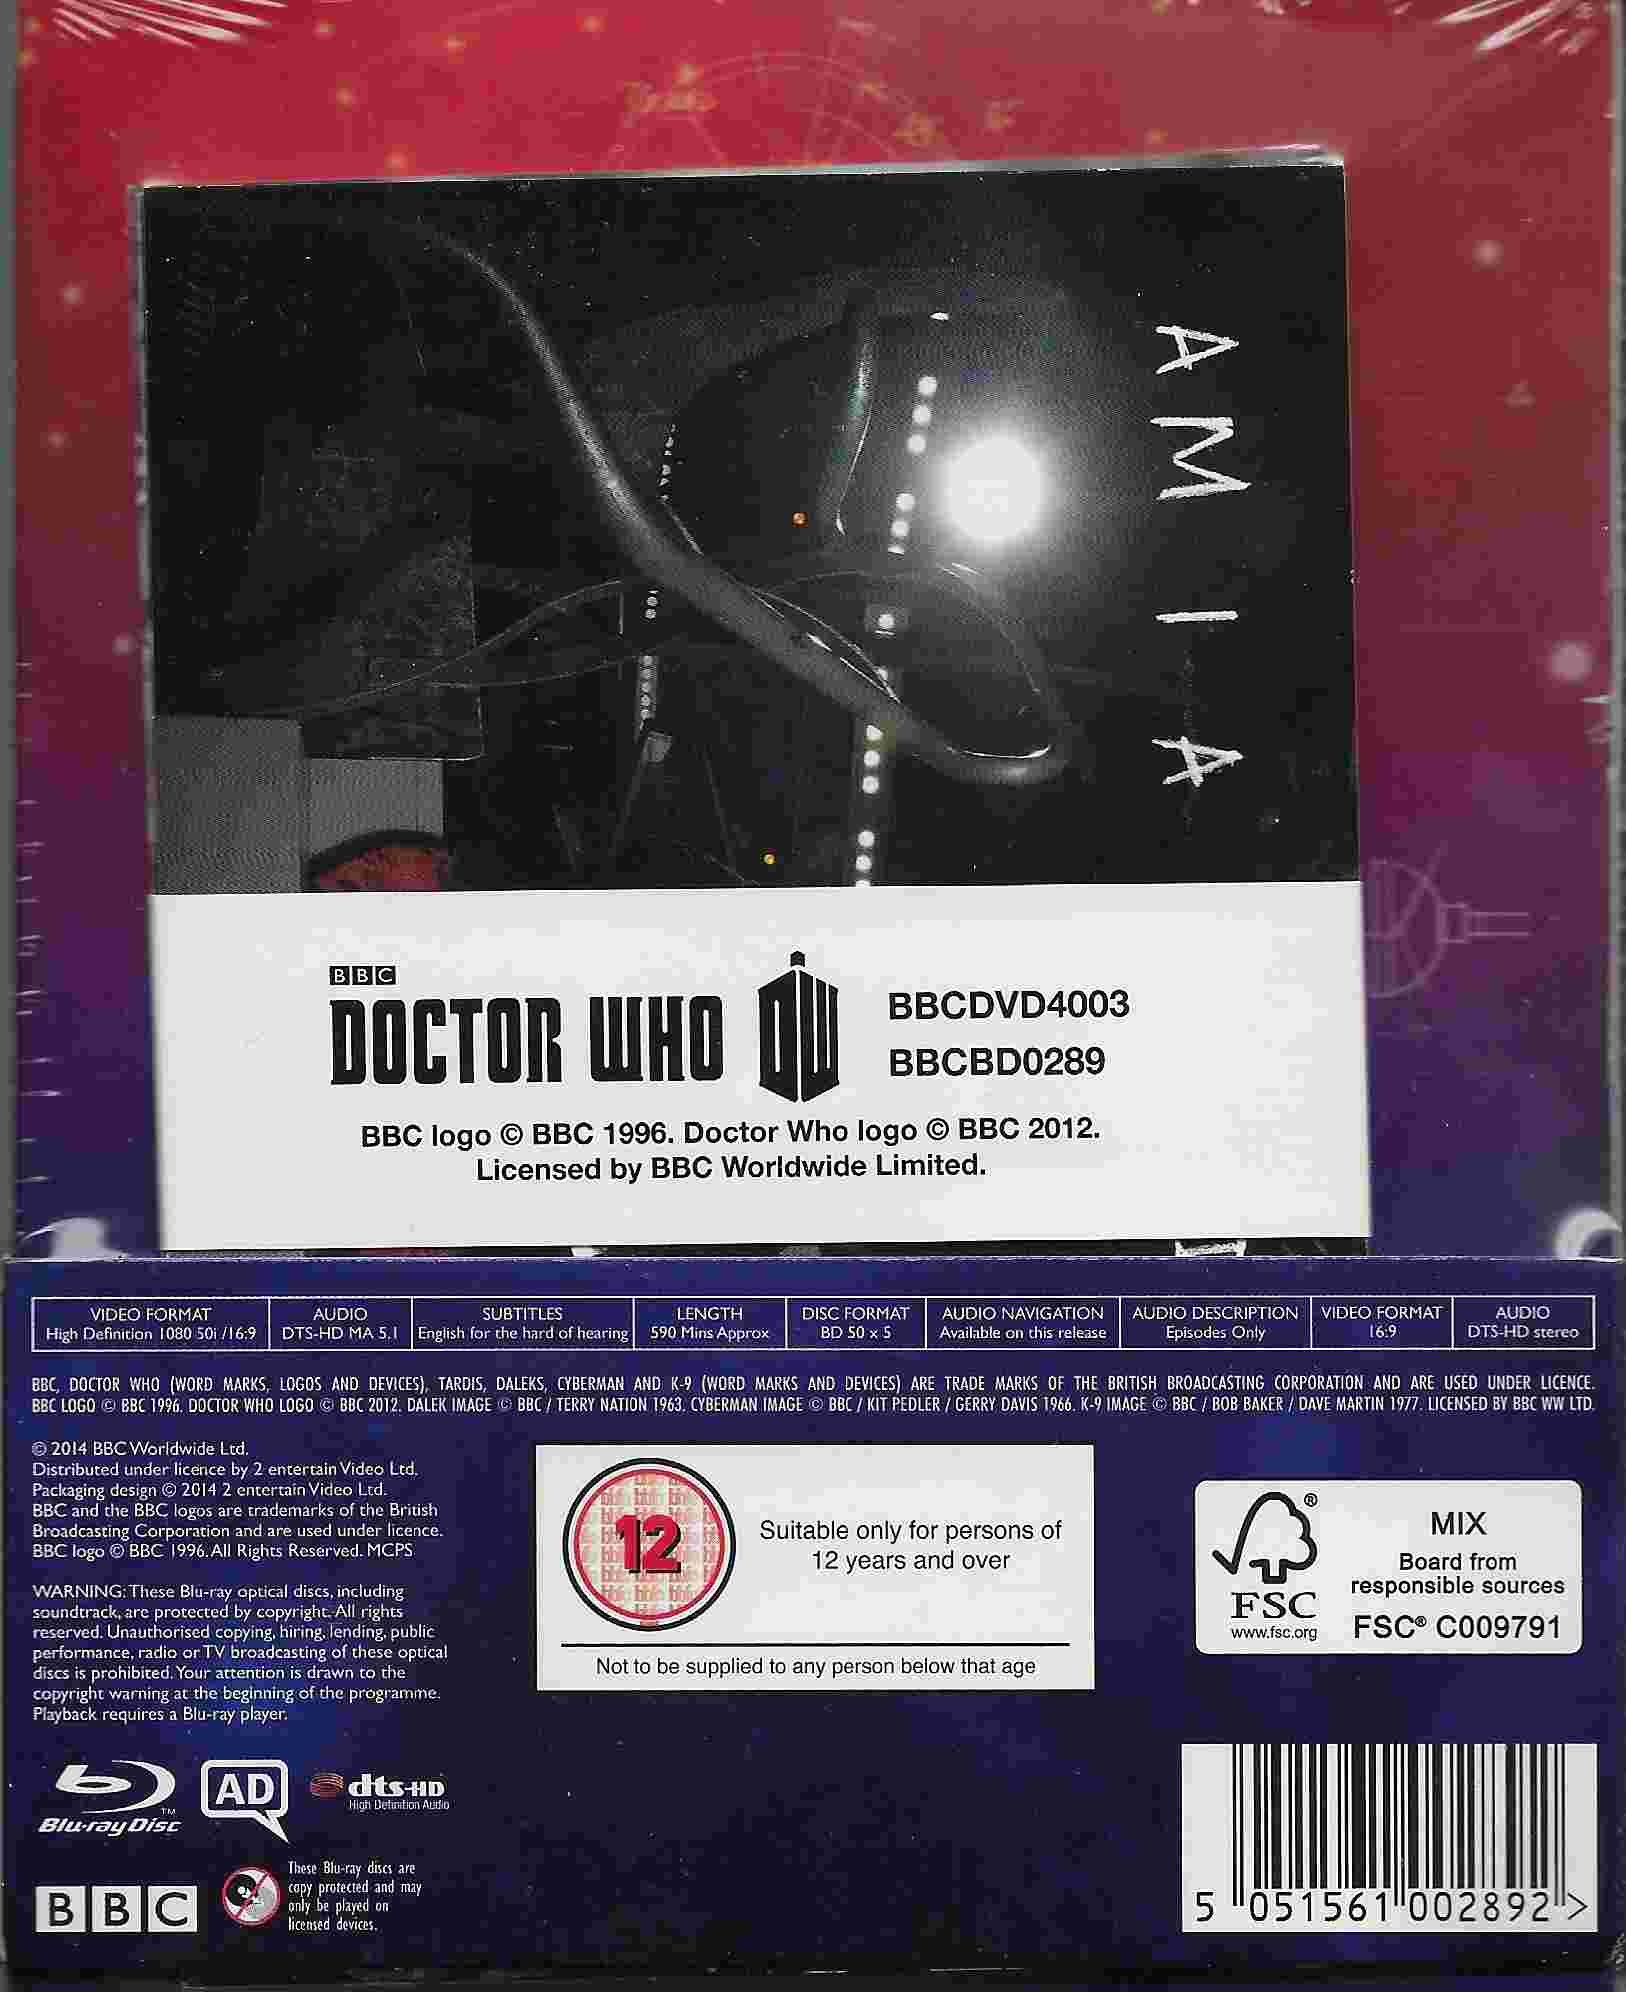 Picture of BBCBD 0289 Doctor Who - Series 8 boxed set by artist Various from the BBC records and Tapes library